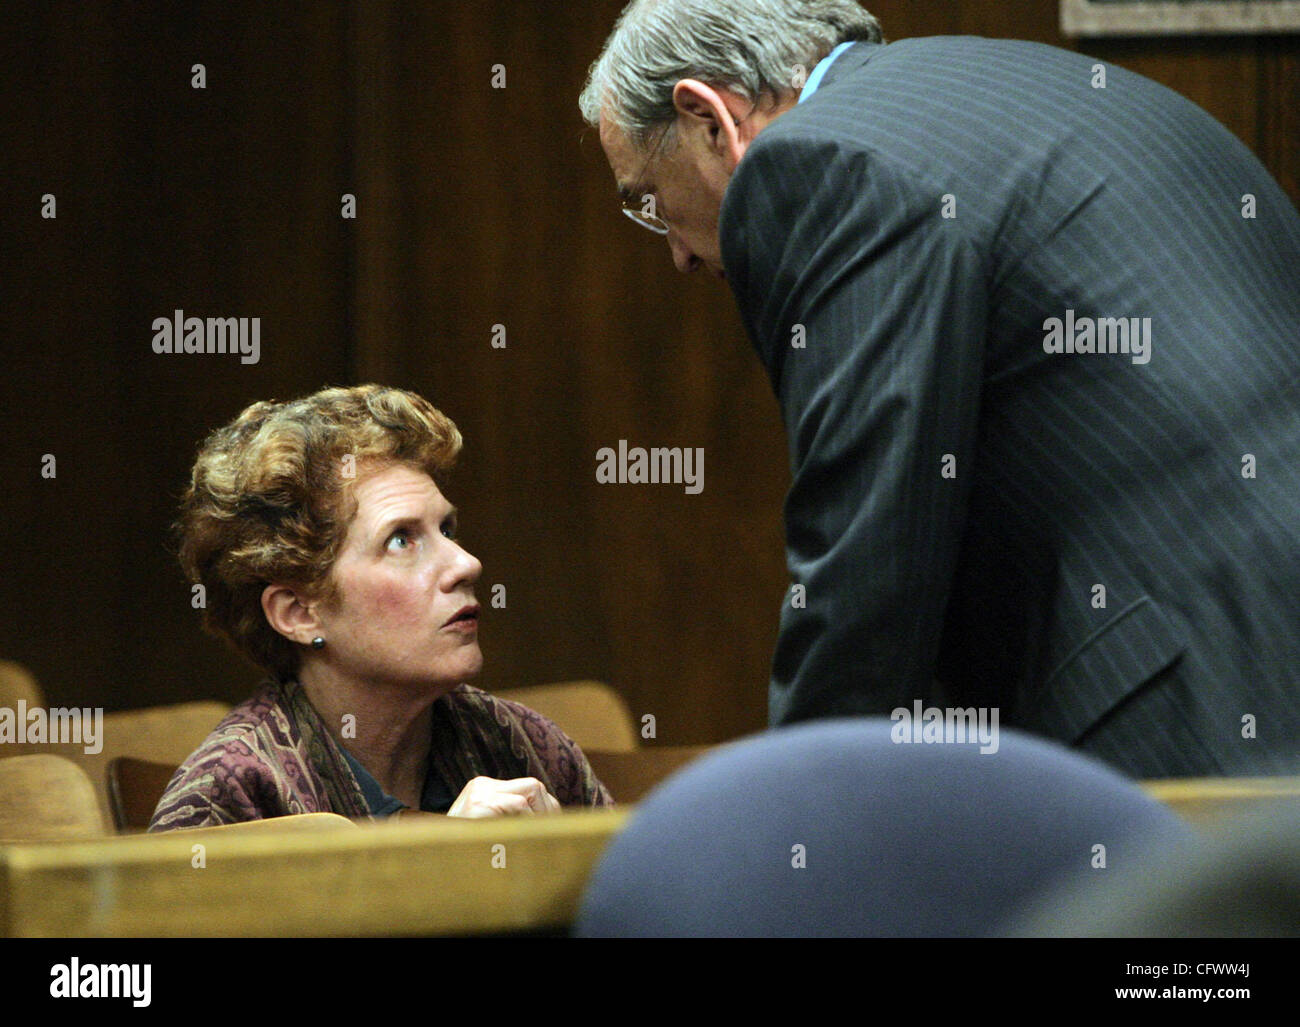 Mar 09, 2007 - Oakland, CA, USA - Hans Reiser's mother, BEVERLY PALMER, talks with Reiser's attorney WILLIAM DUBOIS, before testifying for his son during the hearing to determine if there is enough evidence for a murder trial against Hans Reiser in the murder of his ex-wife, Nin Reiser at the Rene C Stock Photo